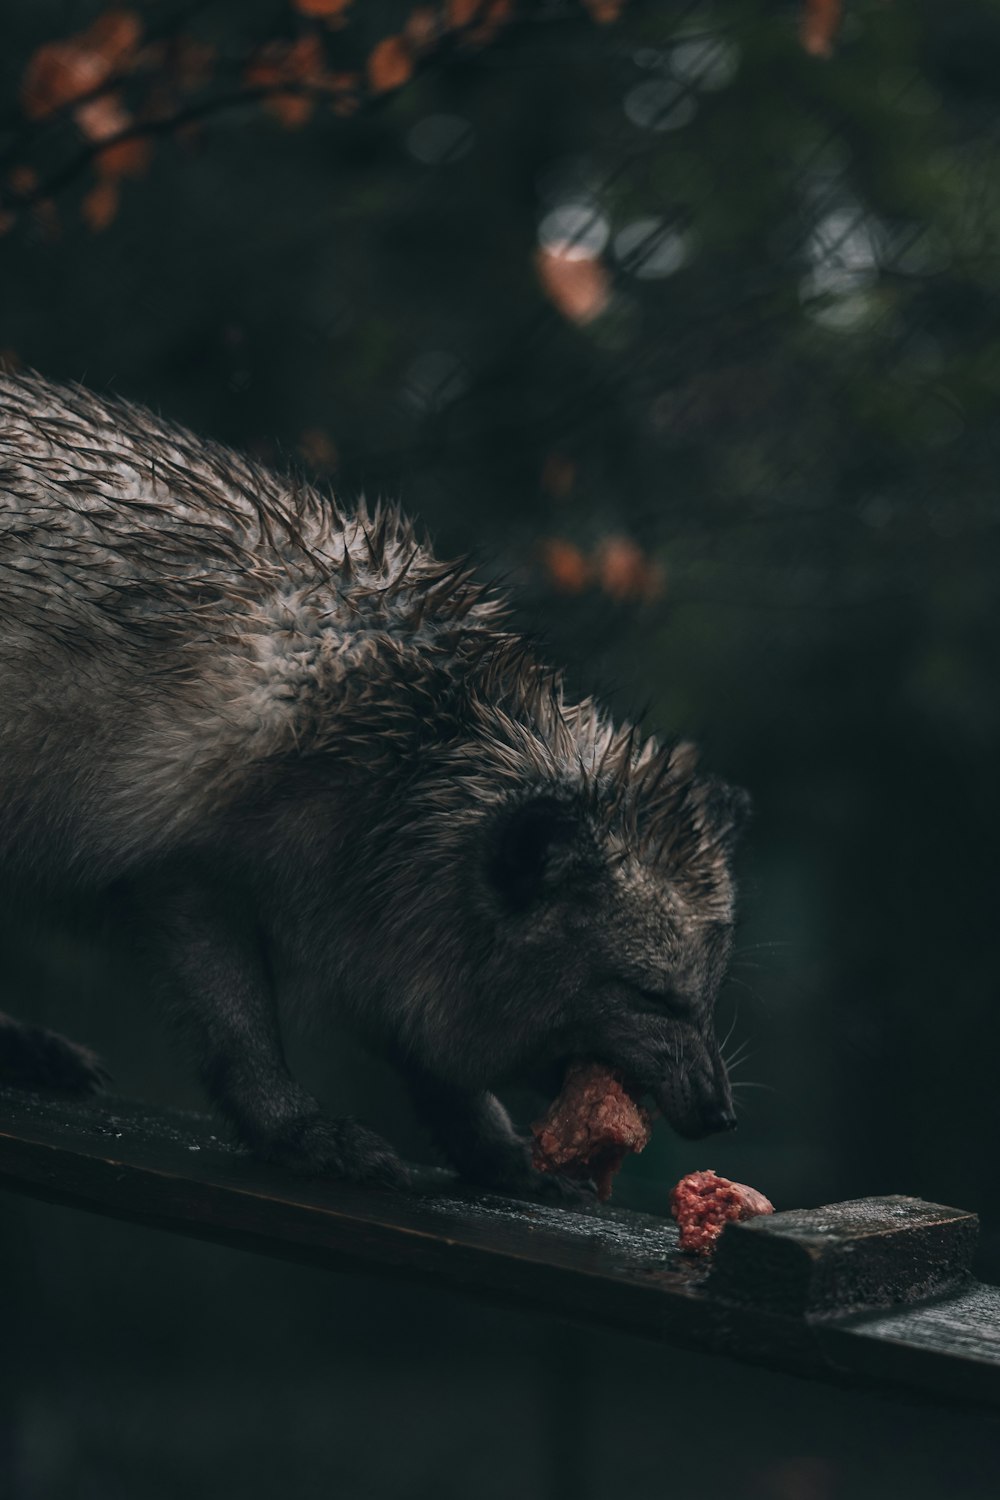 a porcupine eating a piece of meat on a fence